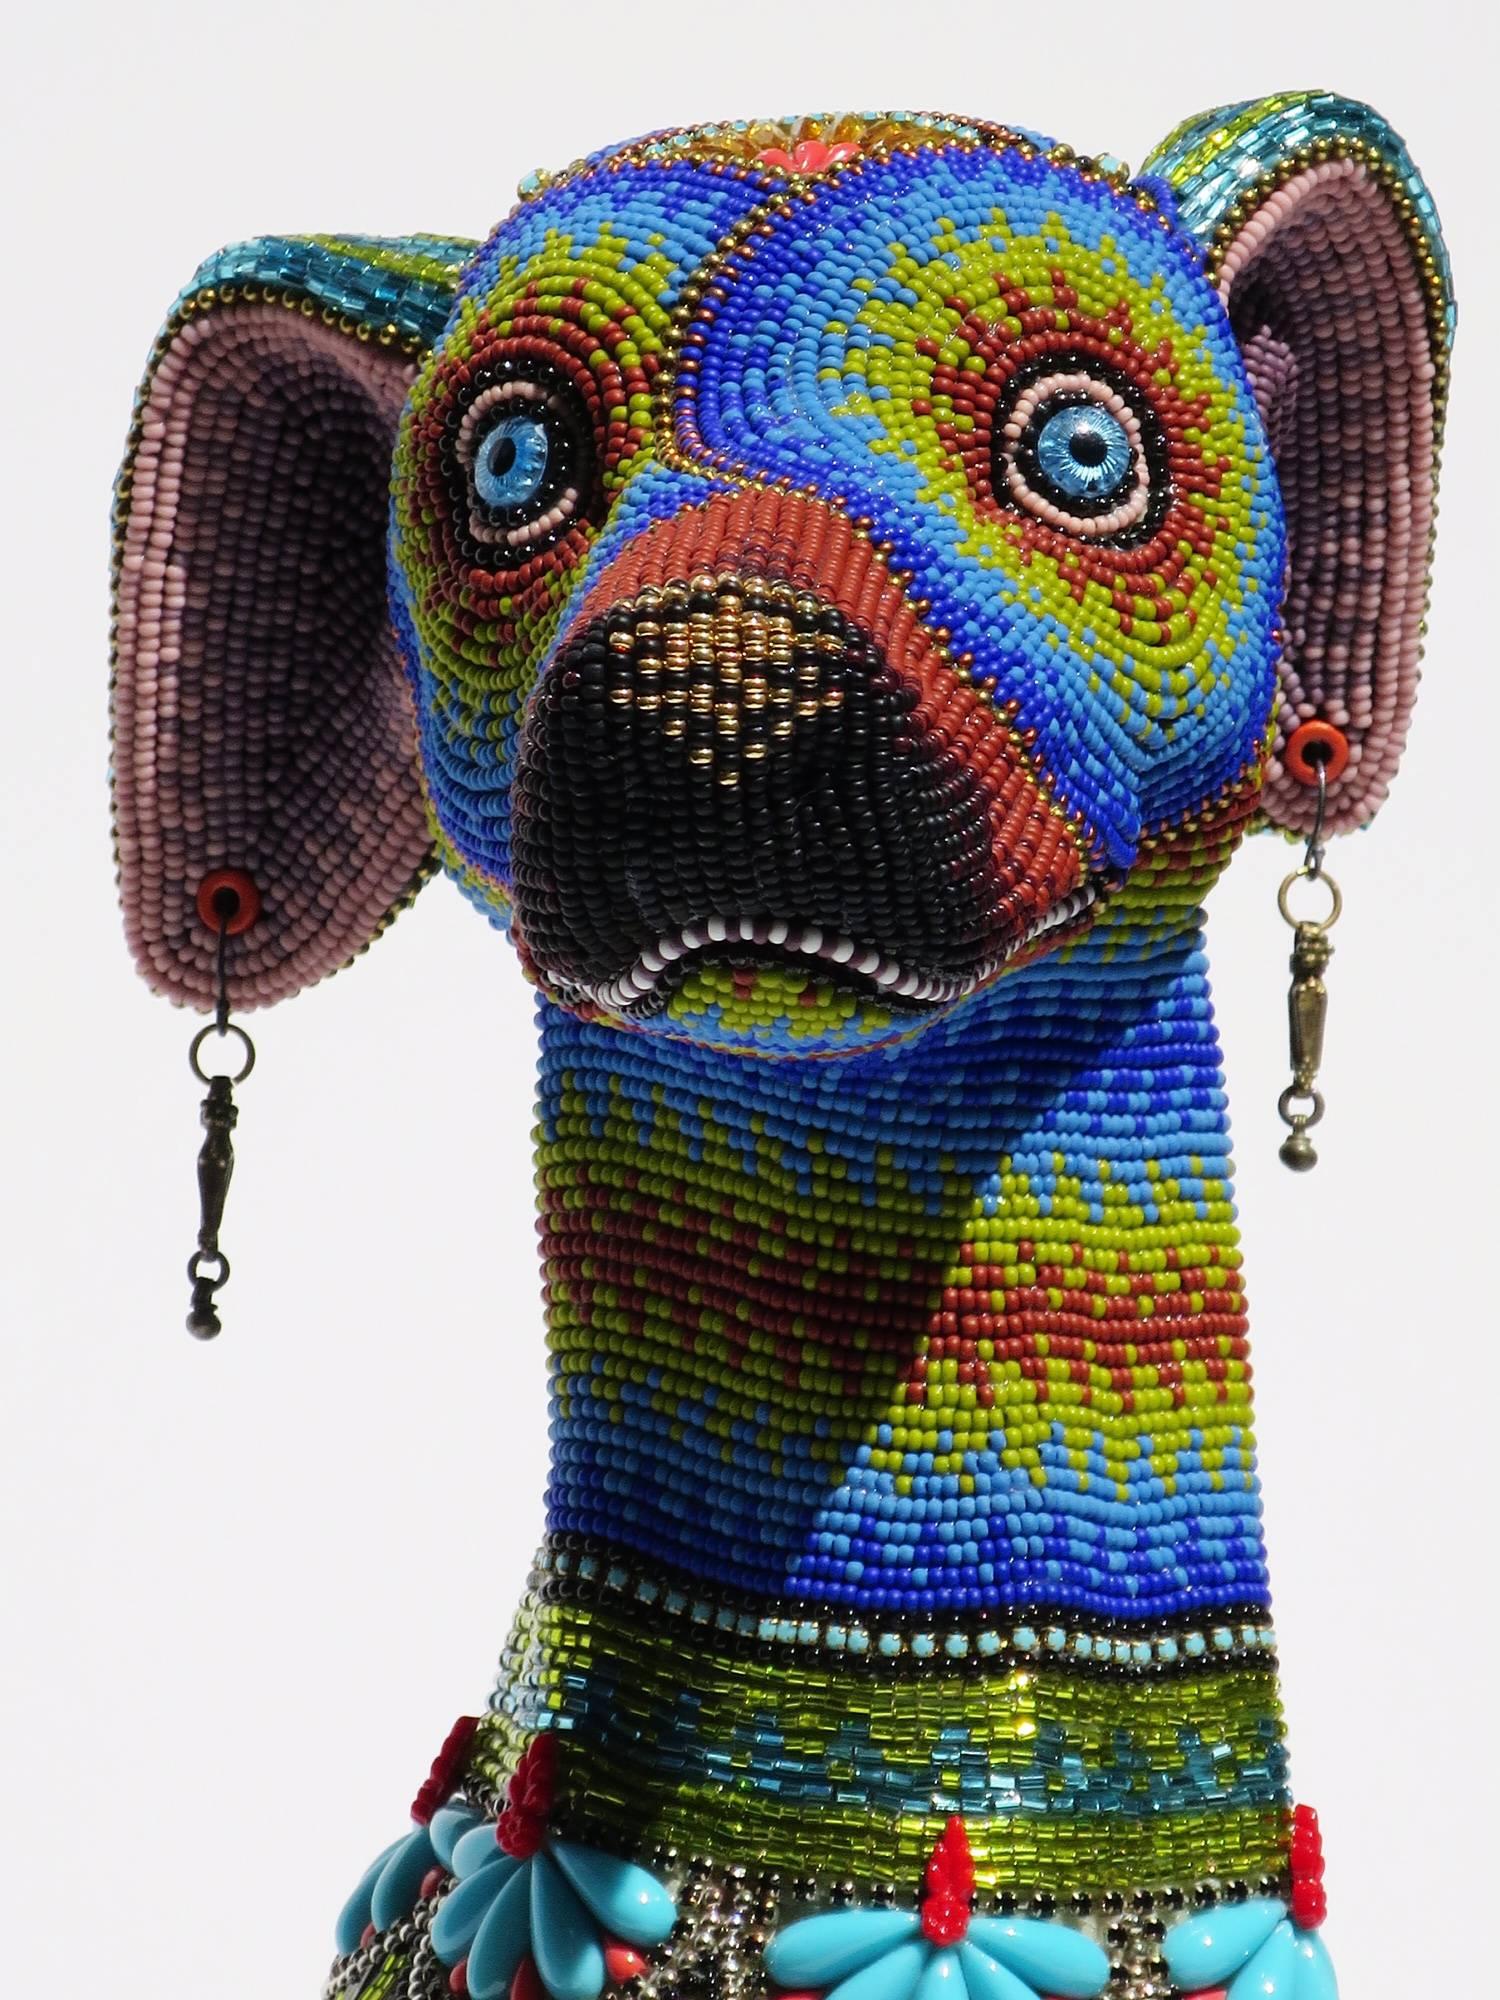 Dicky Boy by Jan Huling, Czech Glass Seed Beads on Mixed Media Sculpture, 2016 1